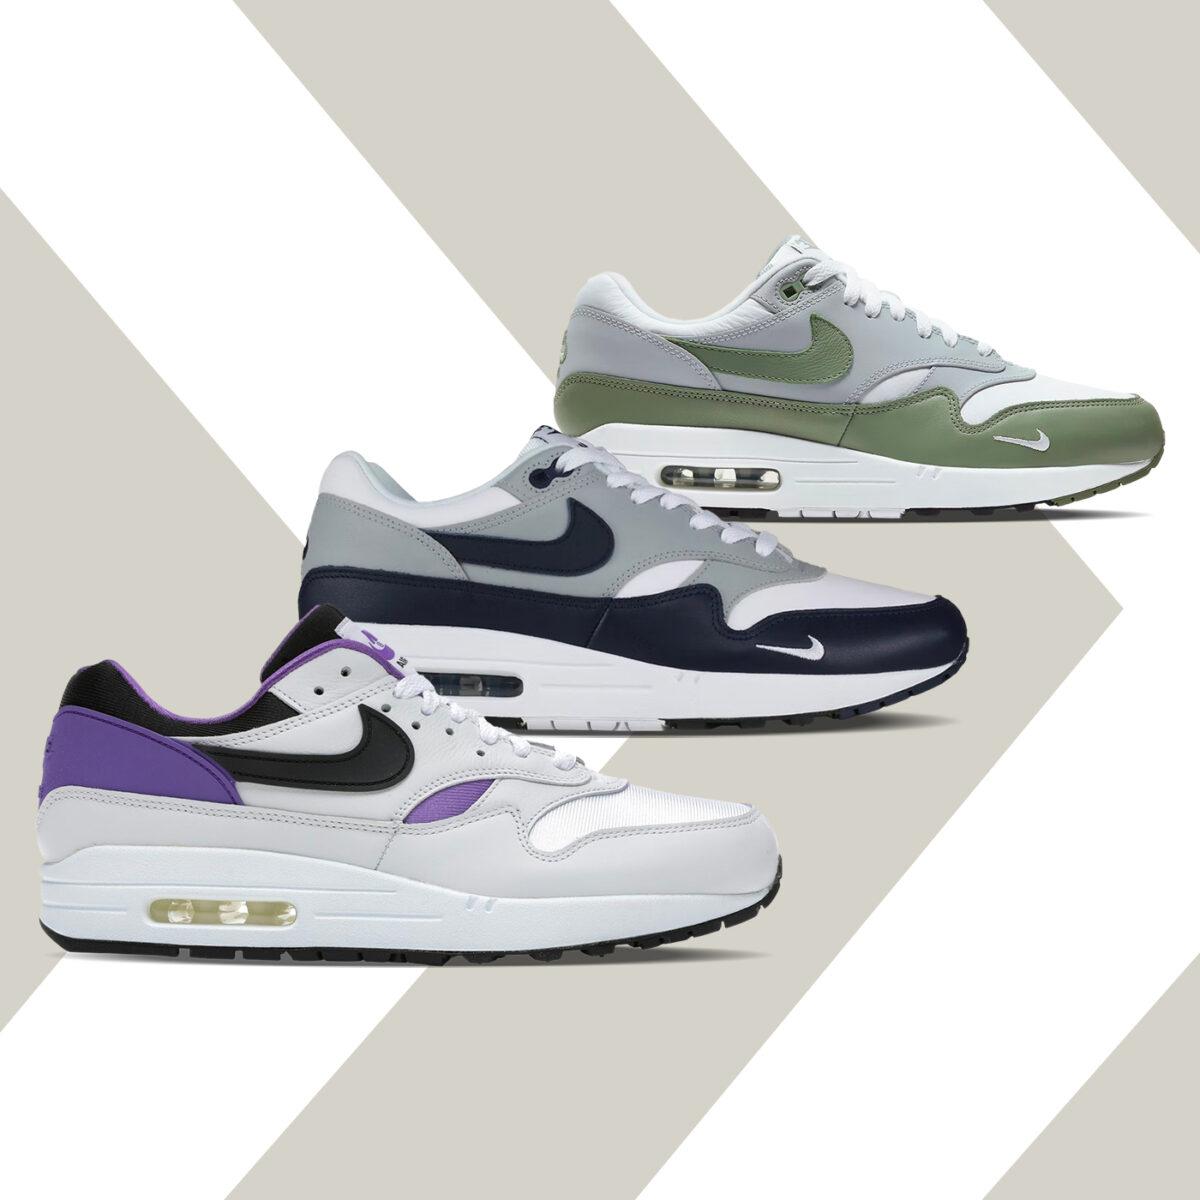 Nike to Bring Back Another Original Air Max 1